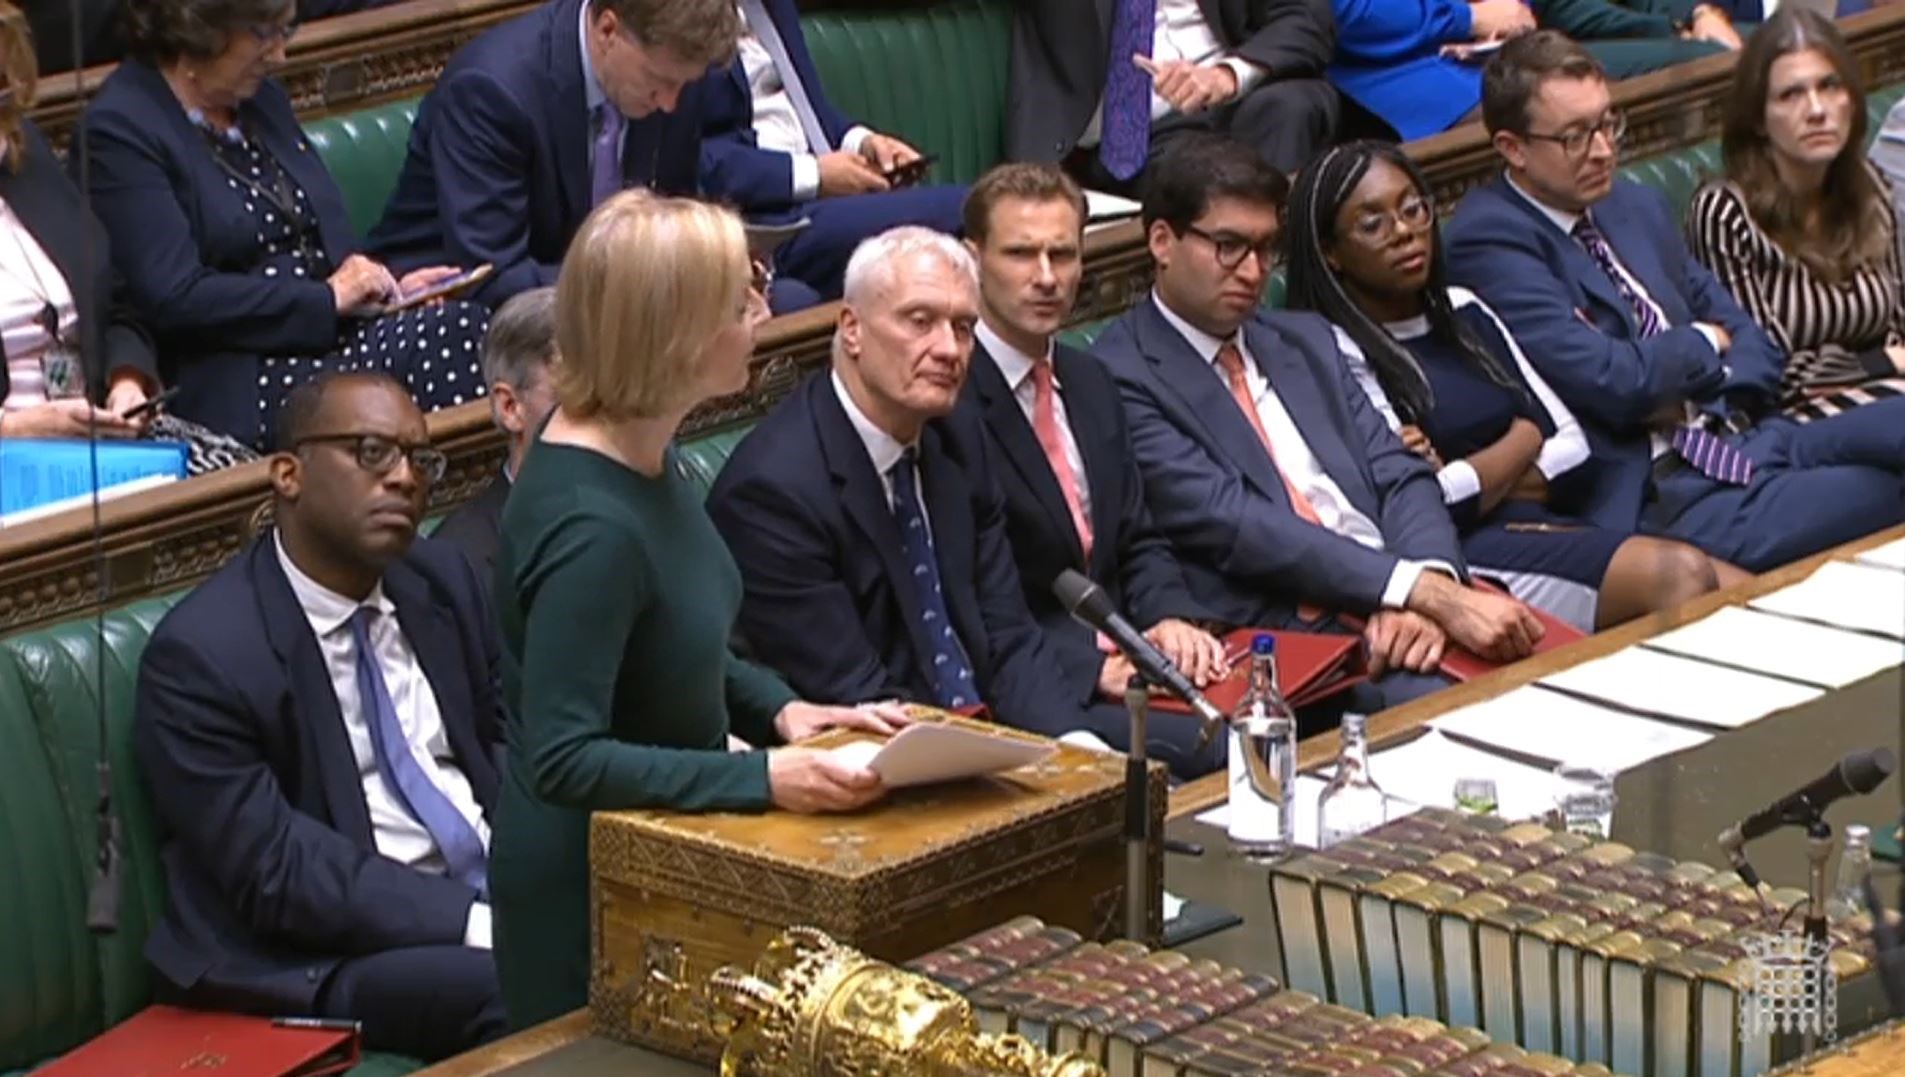 Former prime minister Liz Truss speaking in the House of Commons before she was advised about the late Queen’s worsening health (House of Commons/PA)